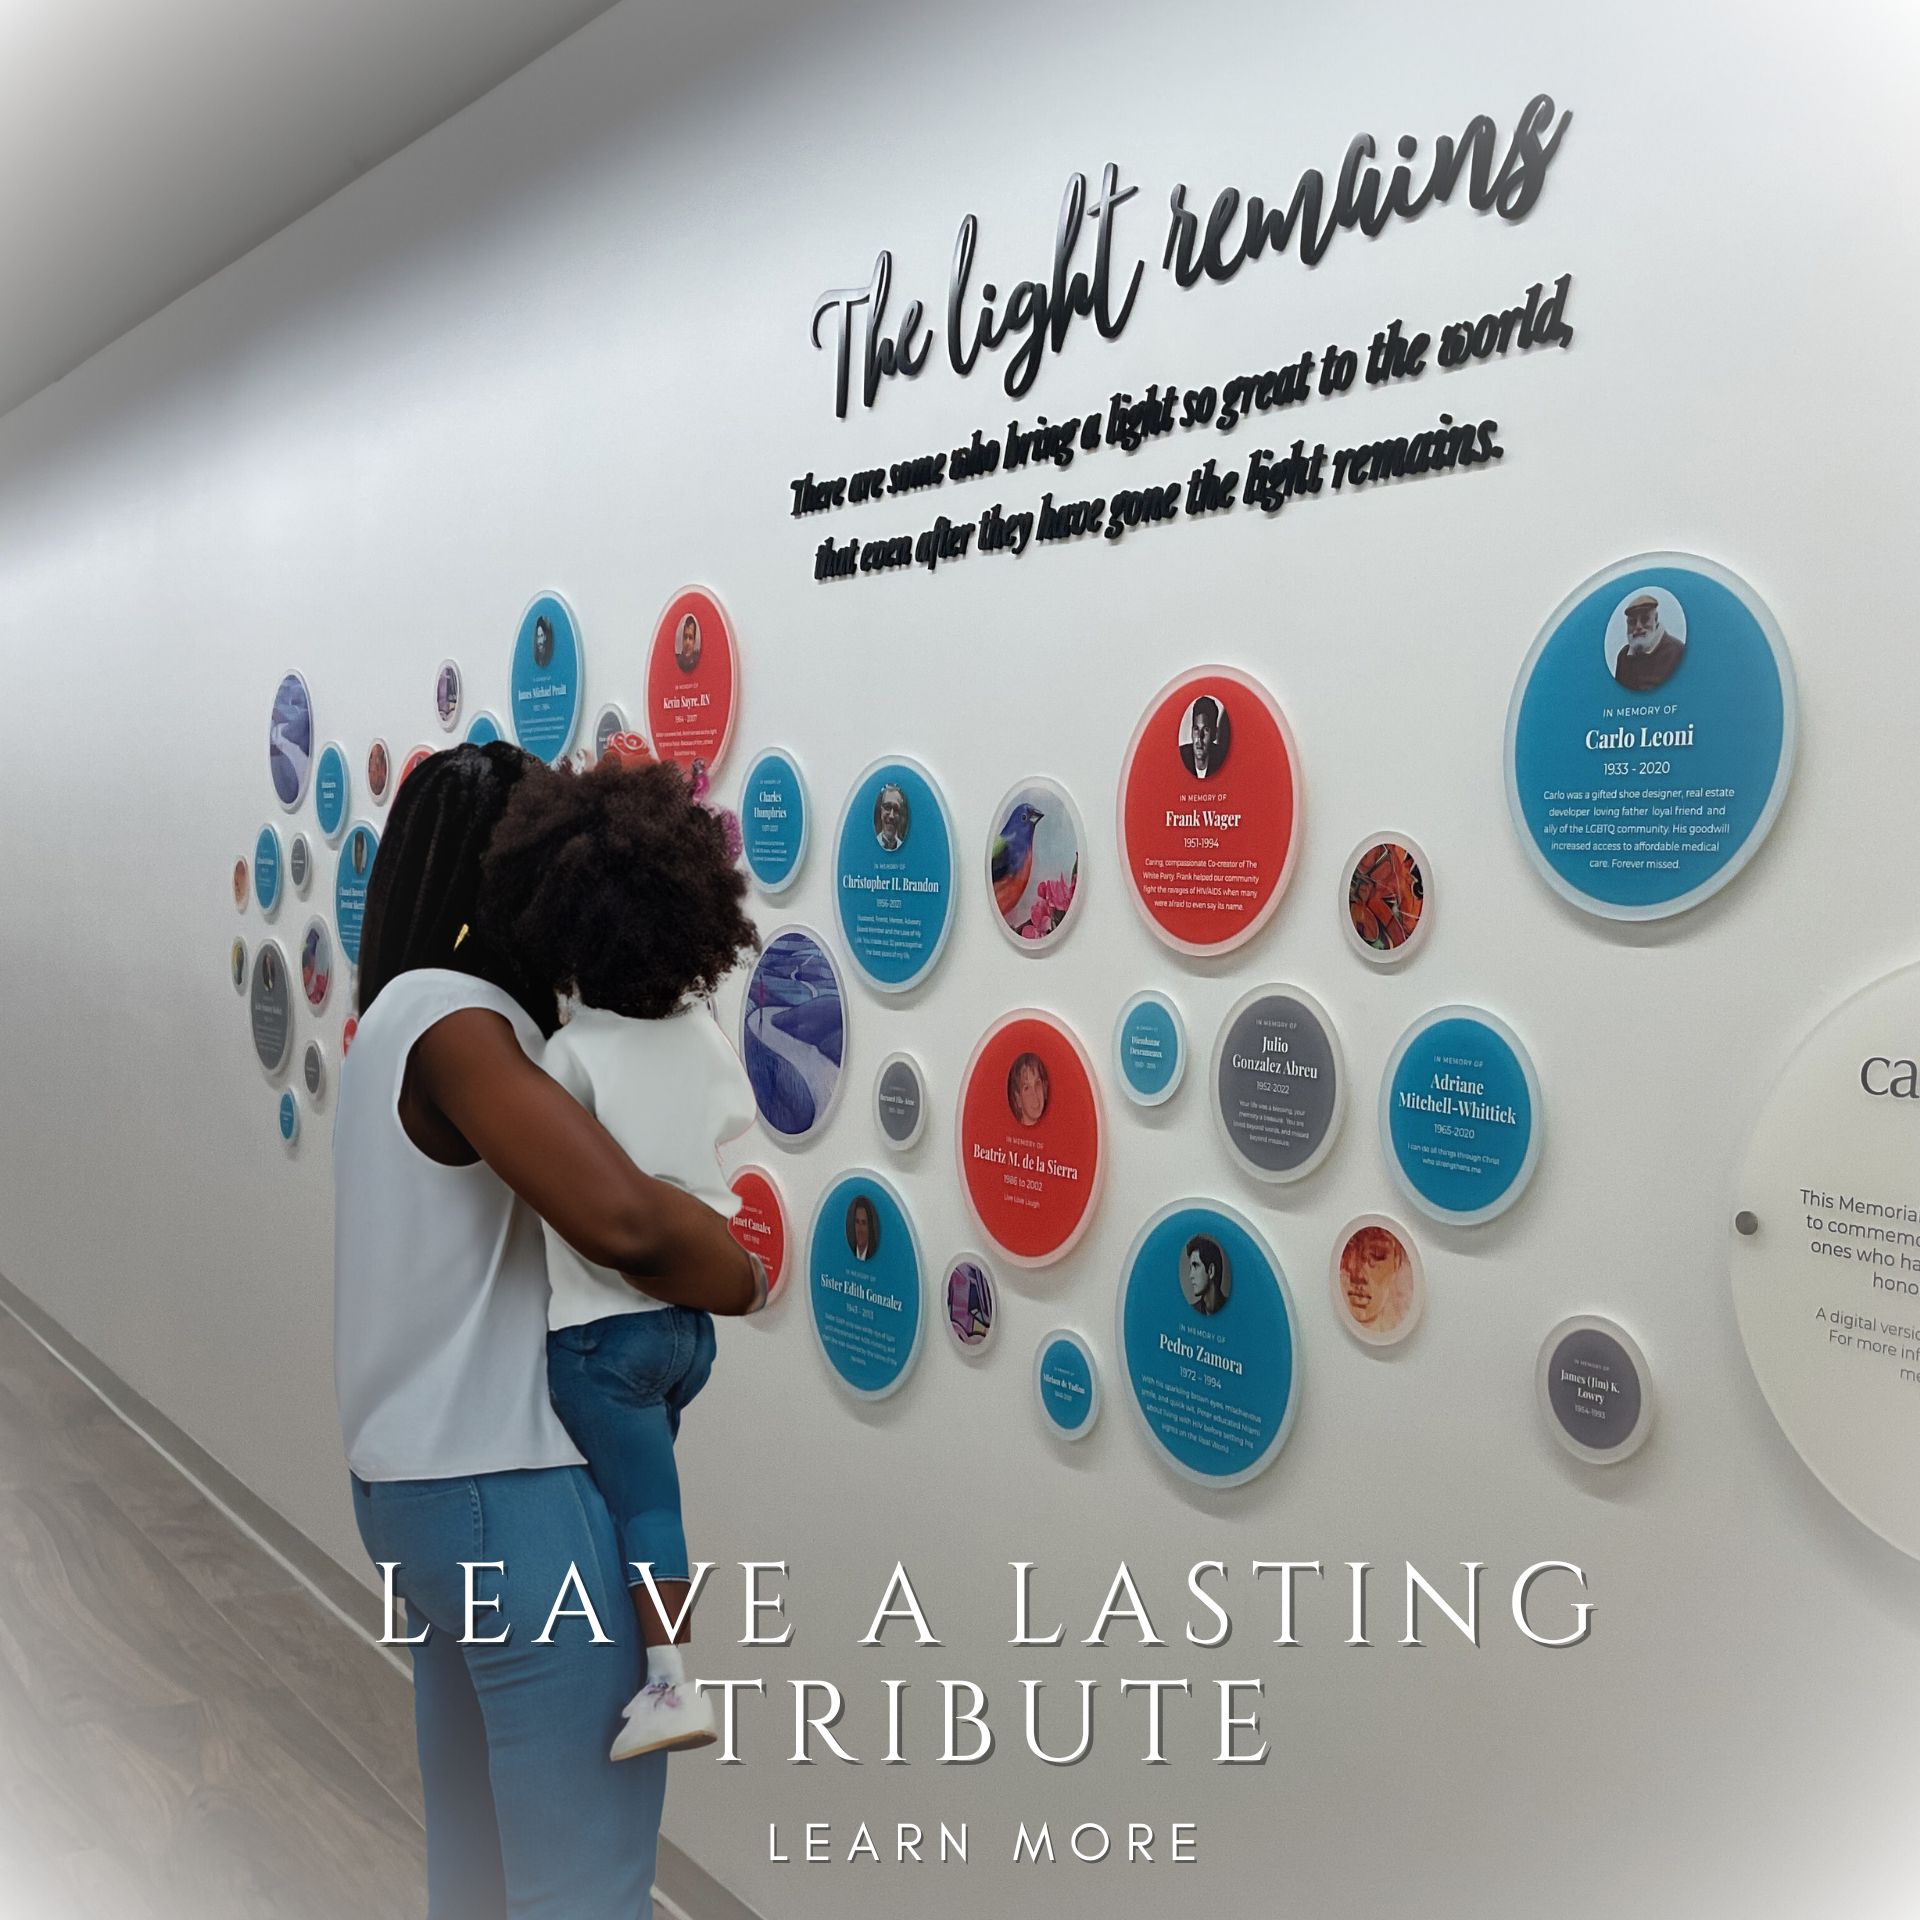 Leave a Lasting Tribute - The light remains memorial